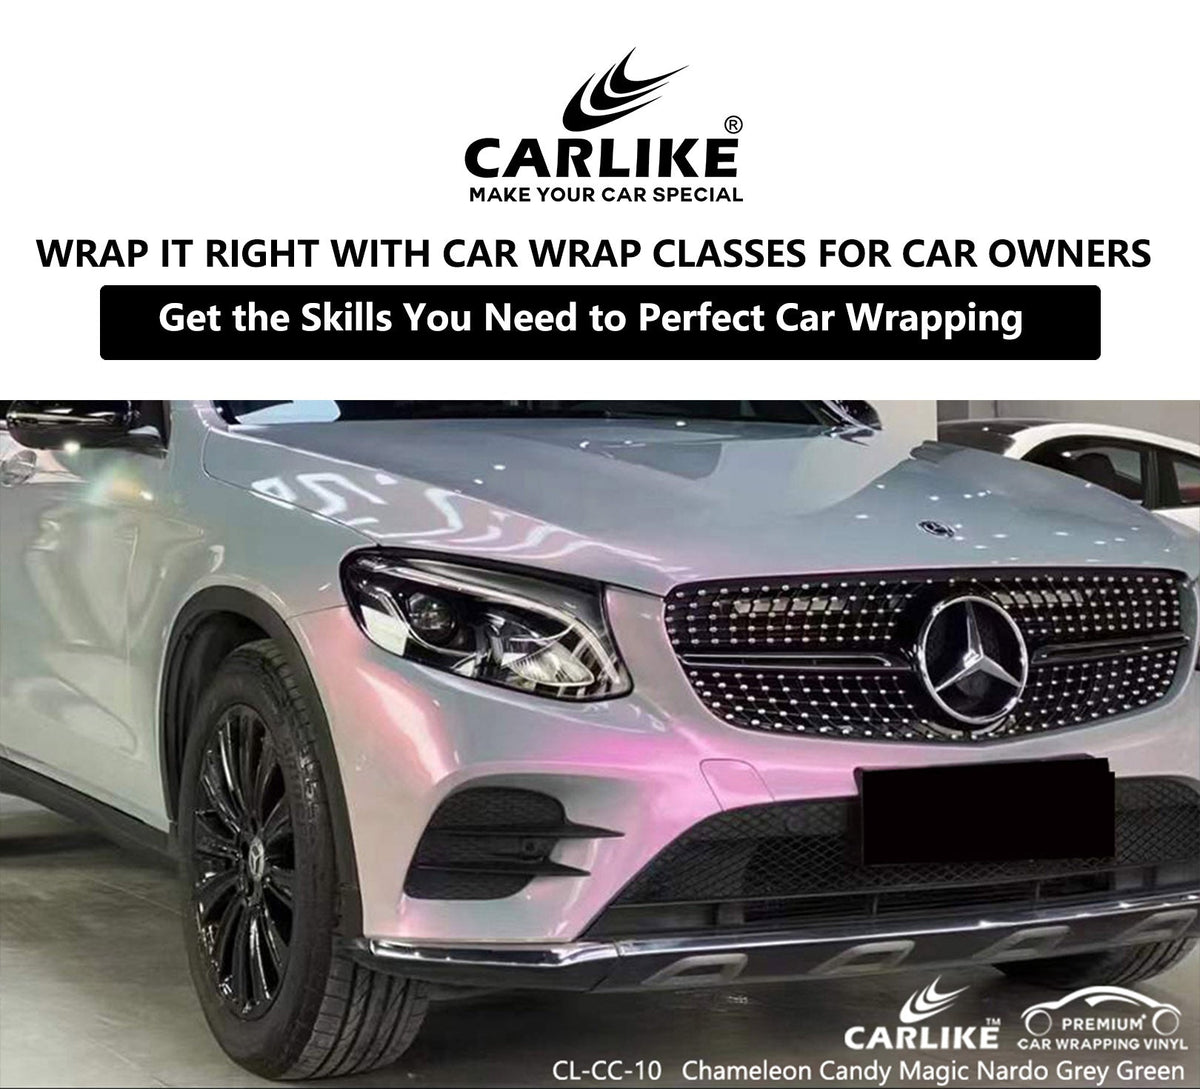 Wrap It Right: Get the Skills You Need to Perfect Car Wrapping – CARLIKE  WRAP